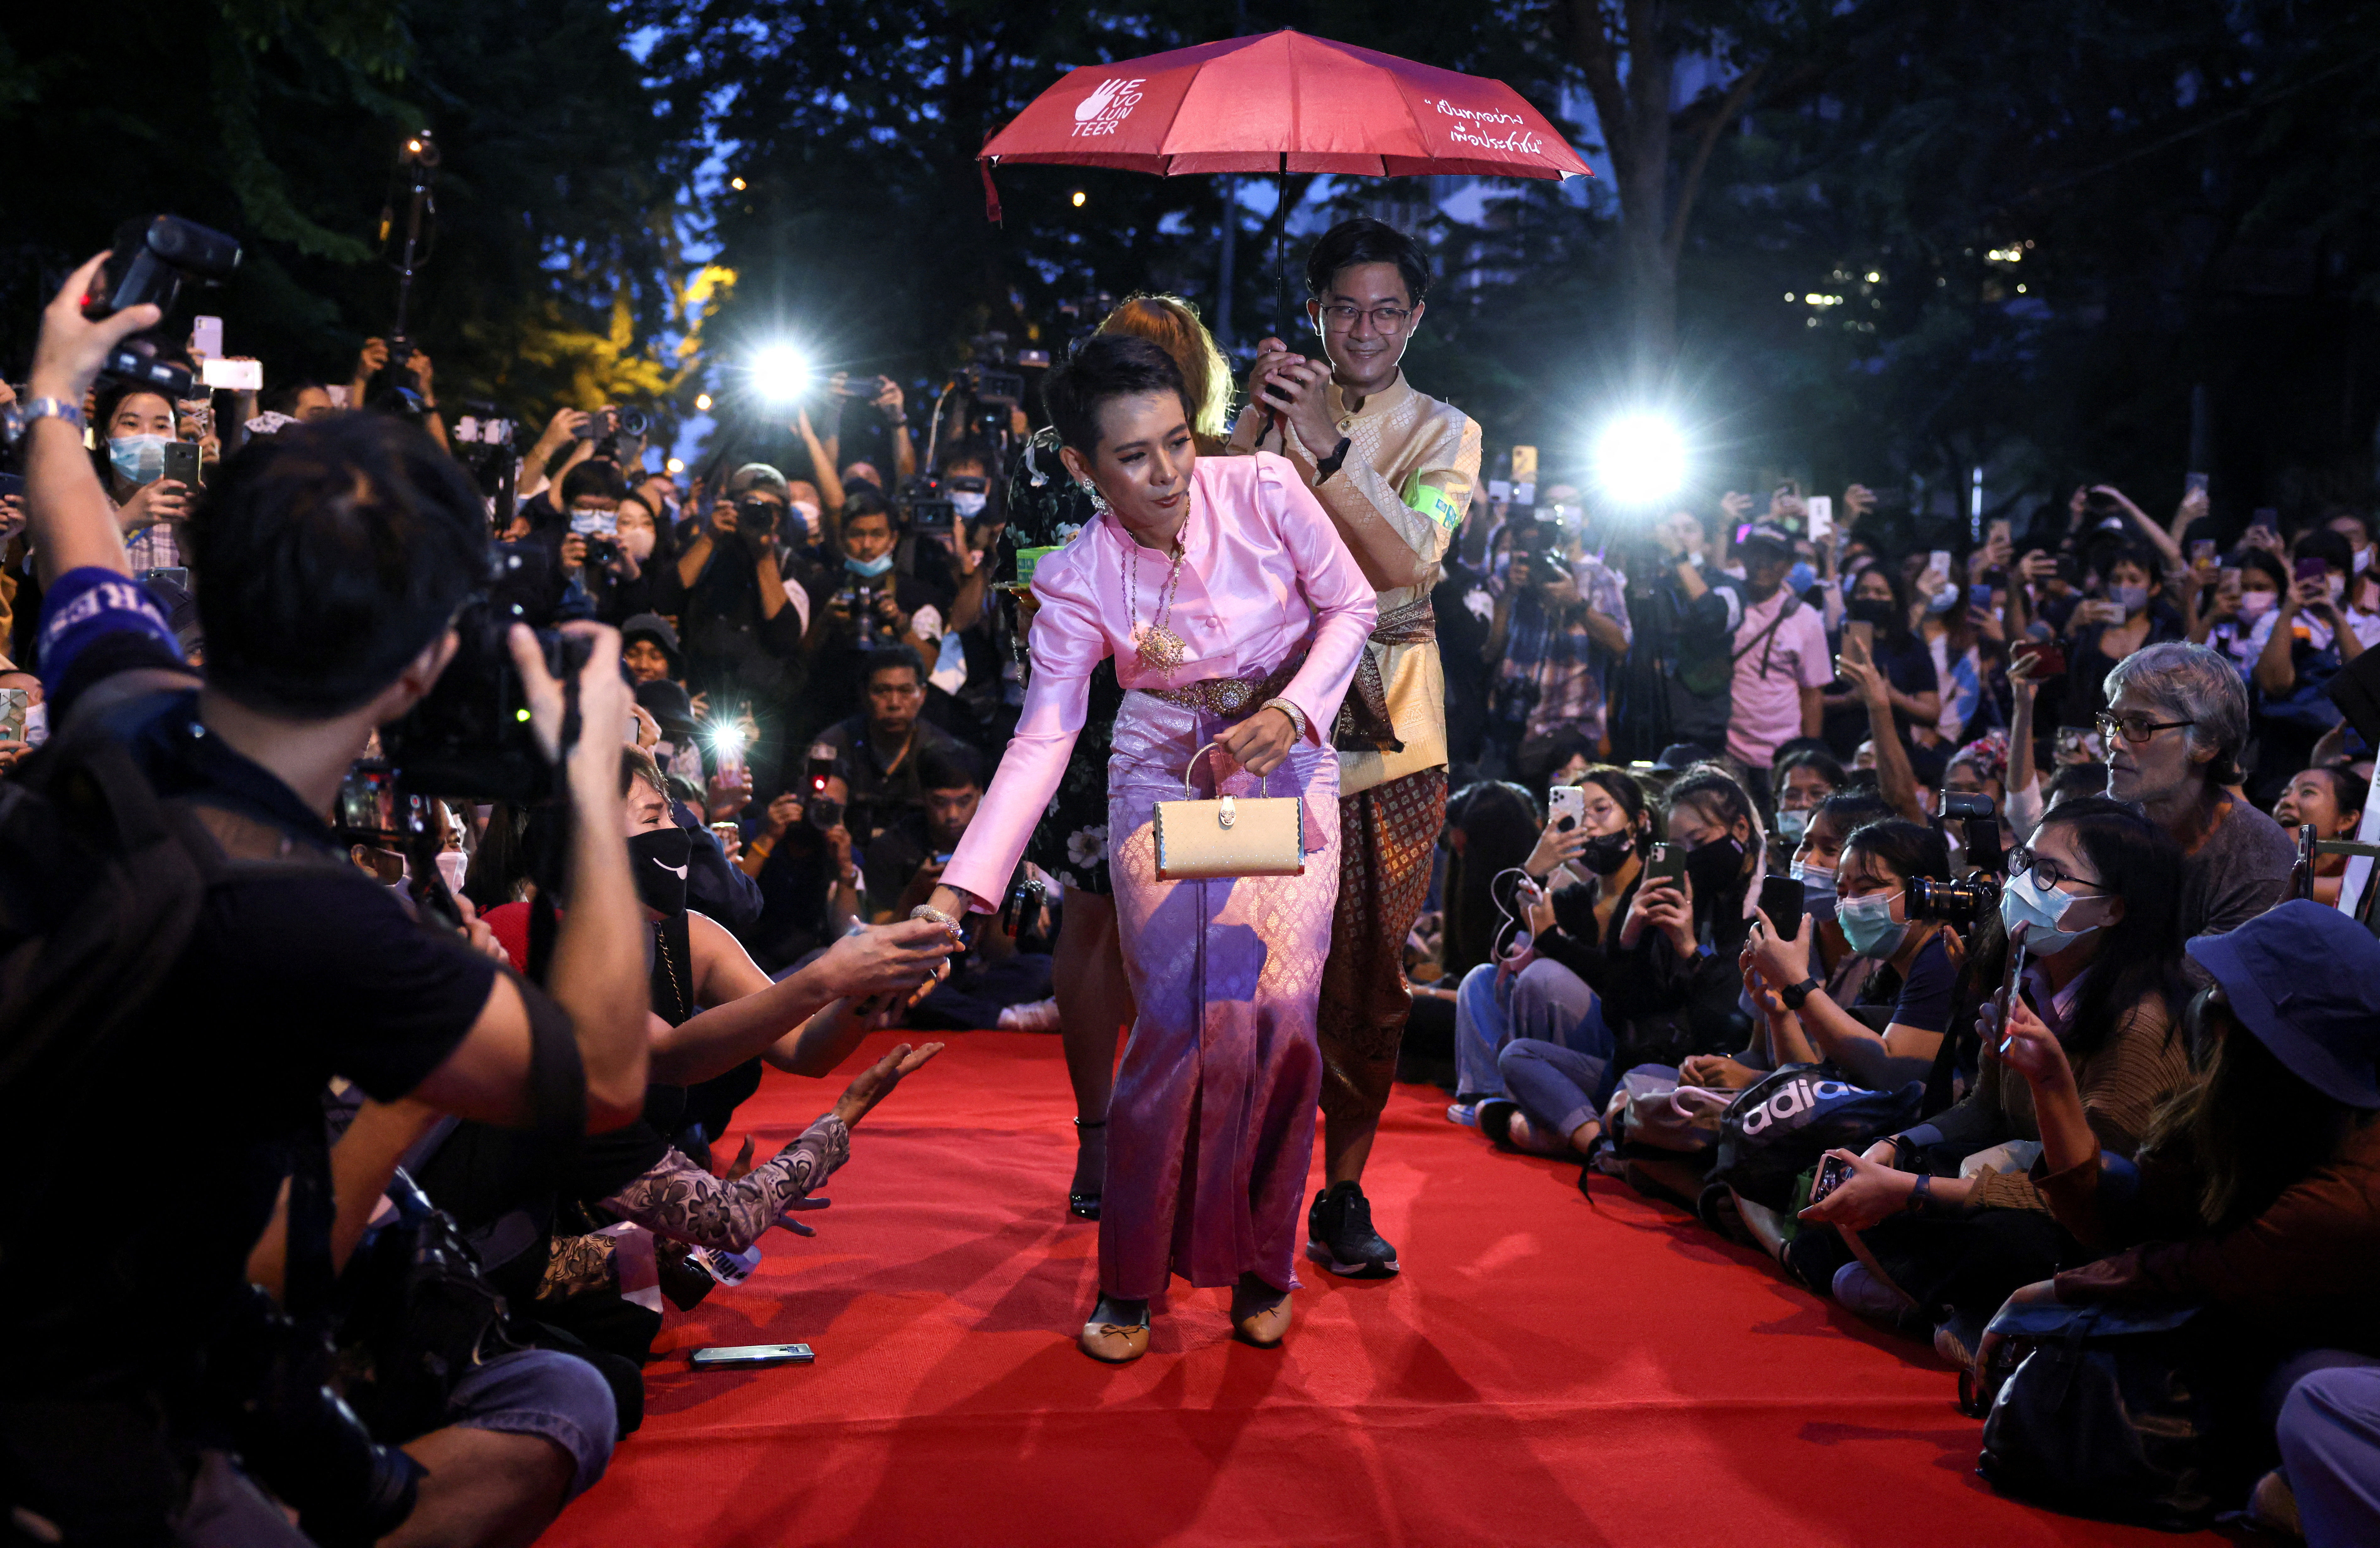 Protesters perform on a red carpet while taking part in a protest against the government and to reform monarchy in Bangkok